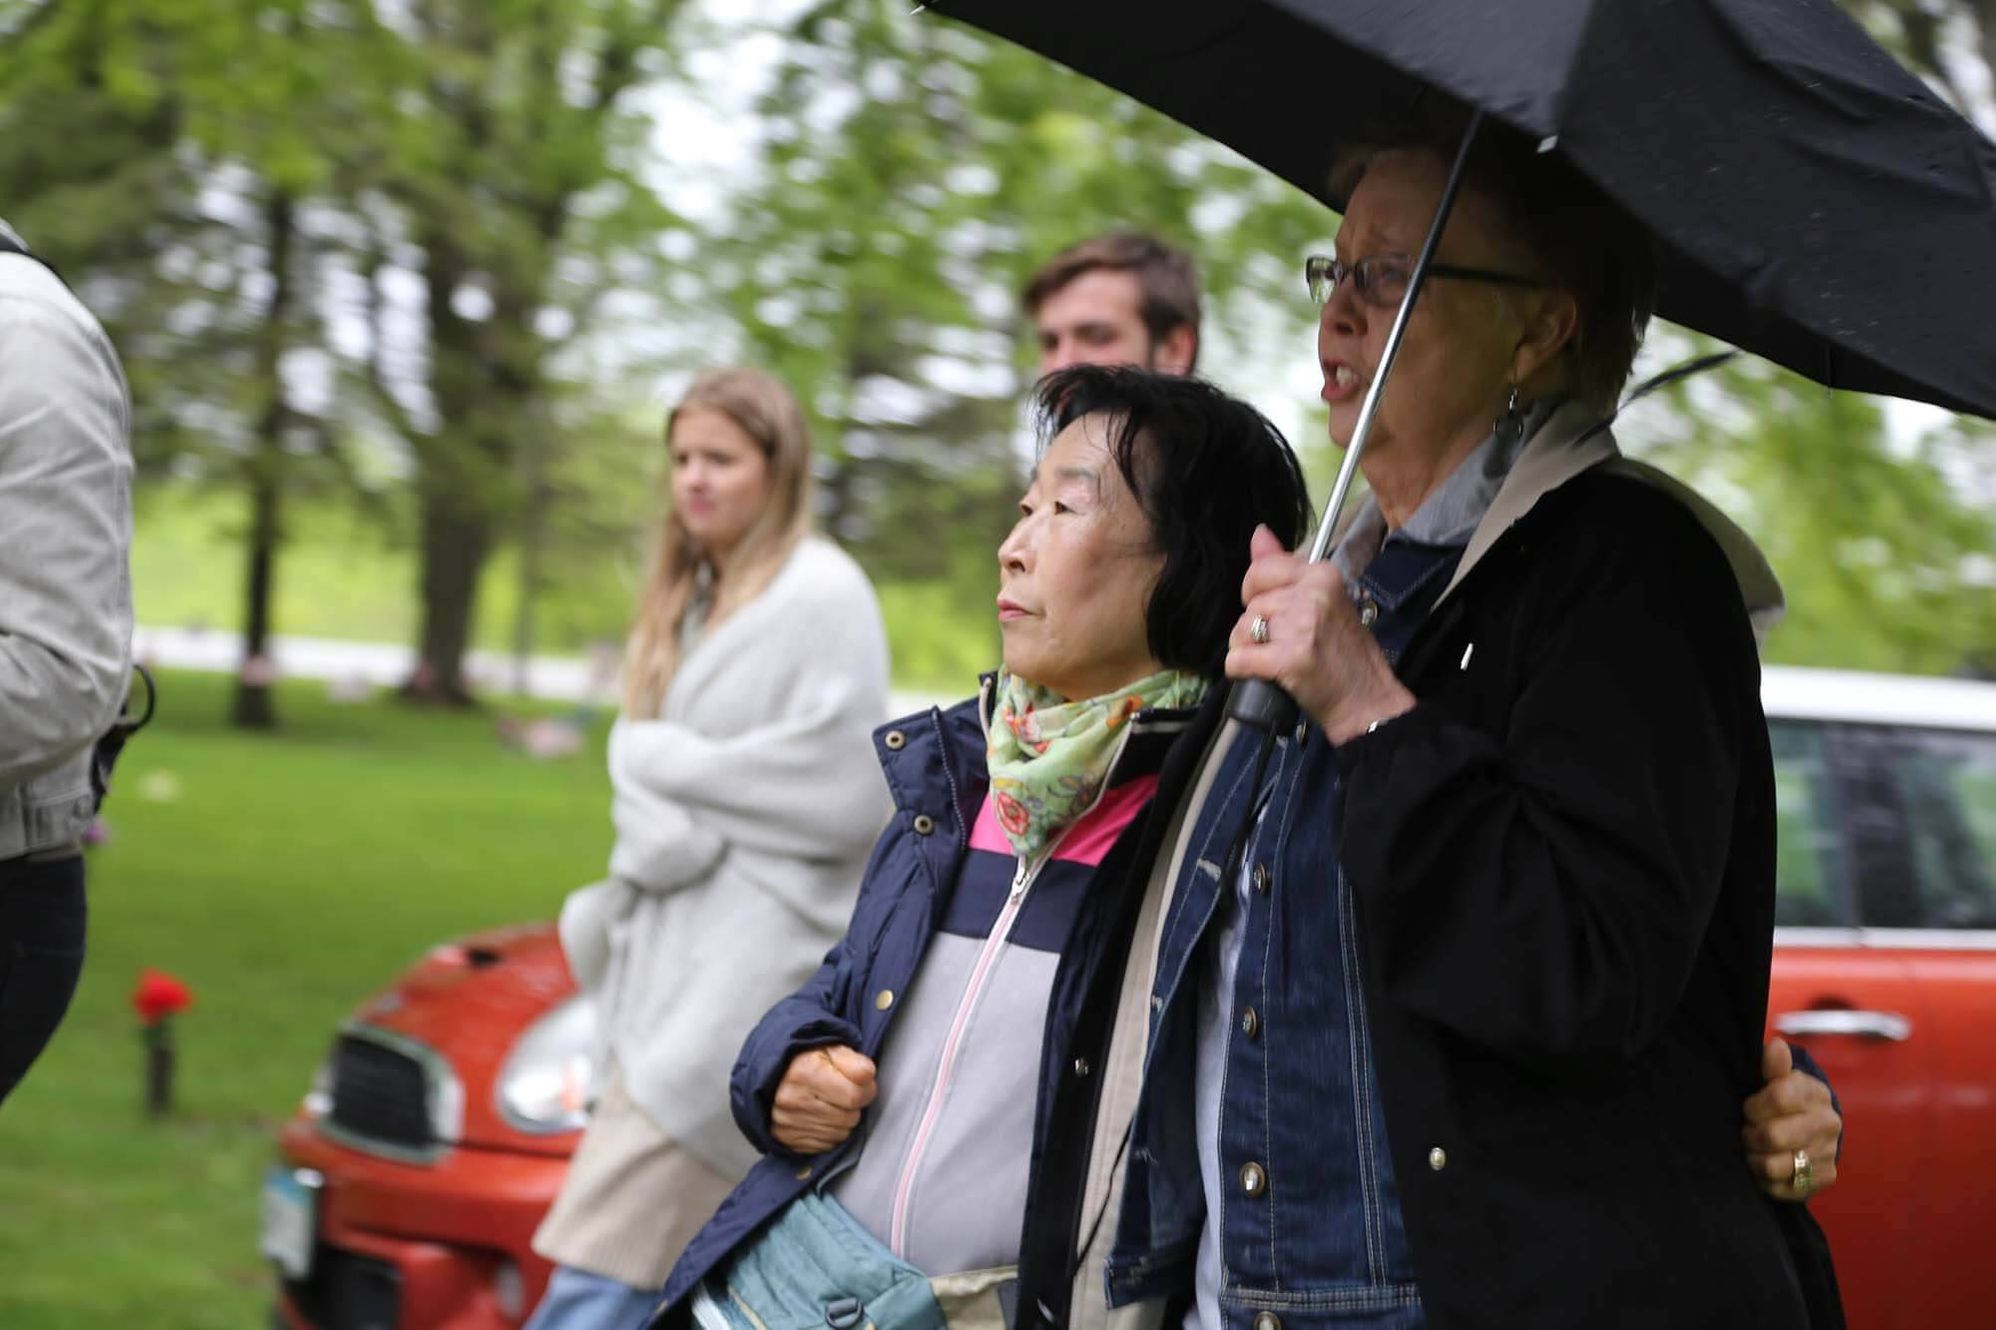 The two mothers watch the Memorial Day tribute at a cemetery in Willmar, Minn.